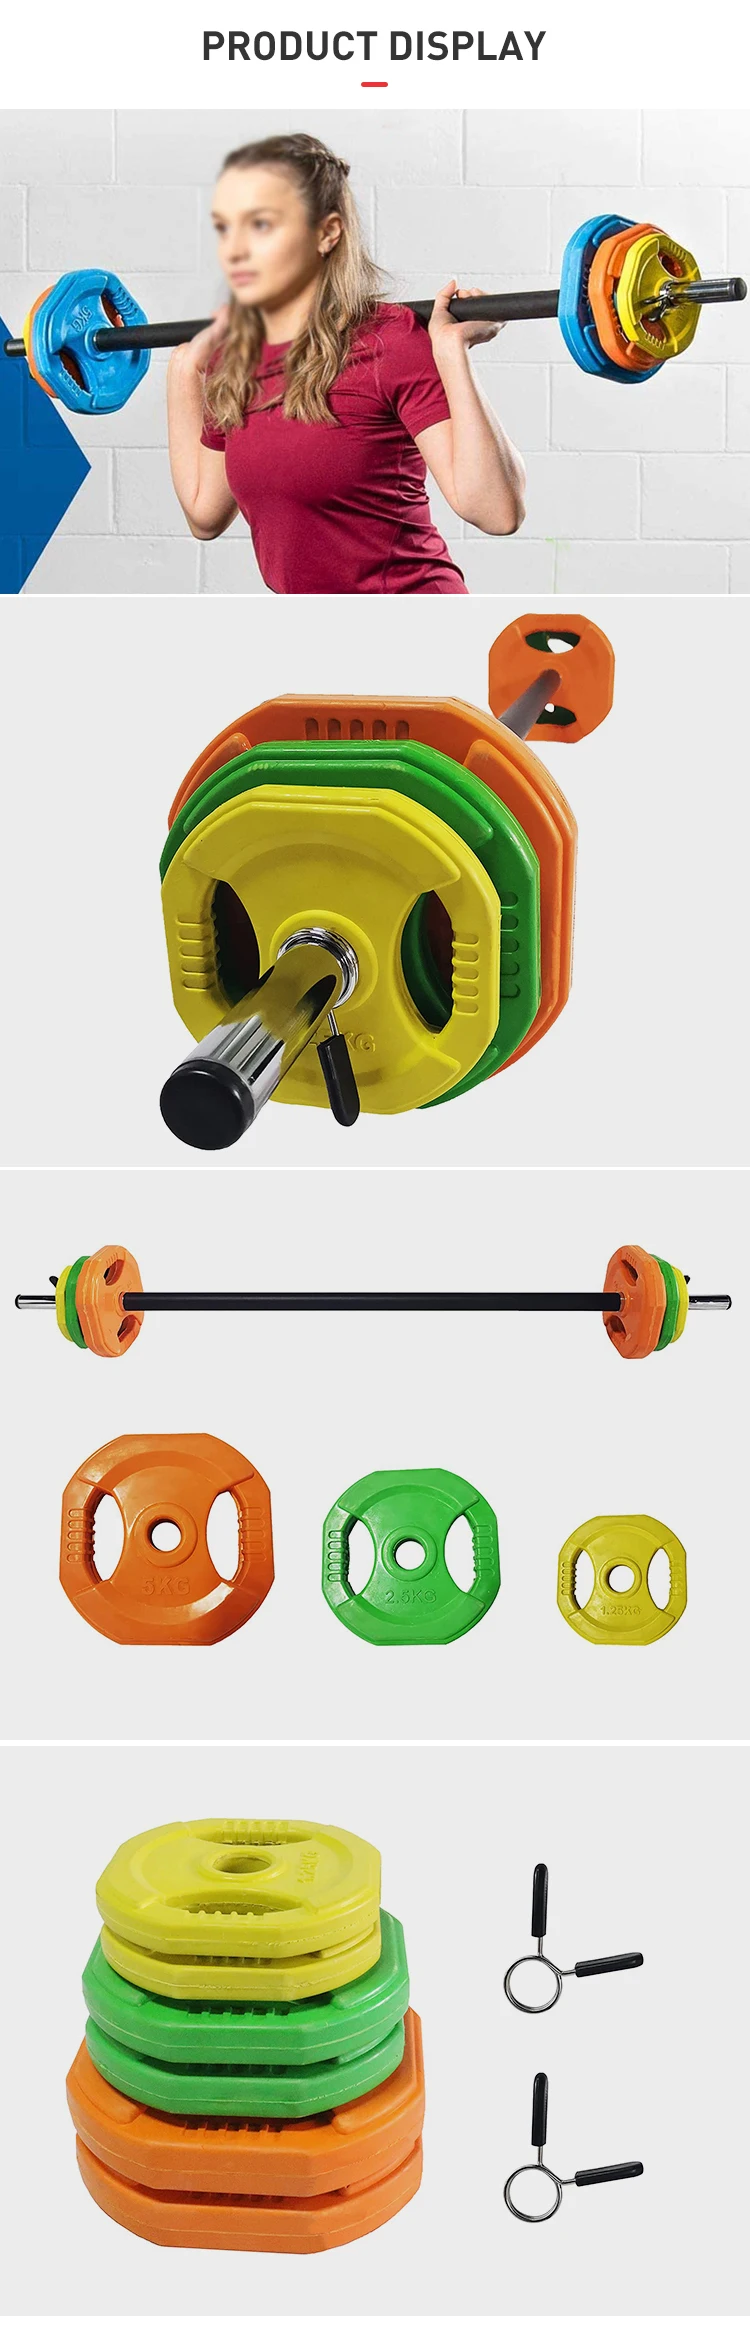 Guli Fitness Pump Set 20KG Aerobic Studio Lady Pump Weights Barbell Set Rubber Coated Weight Plates With Bar And Spring Collar